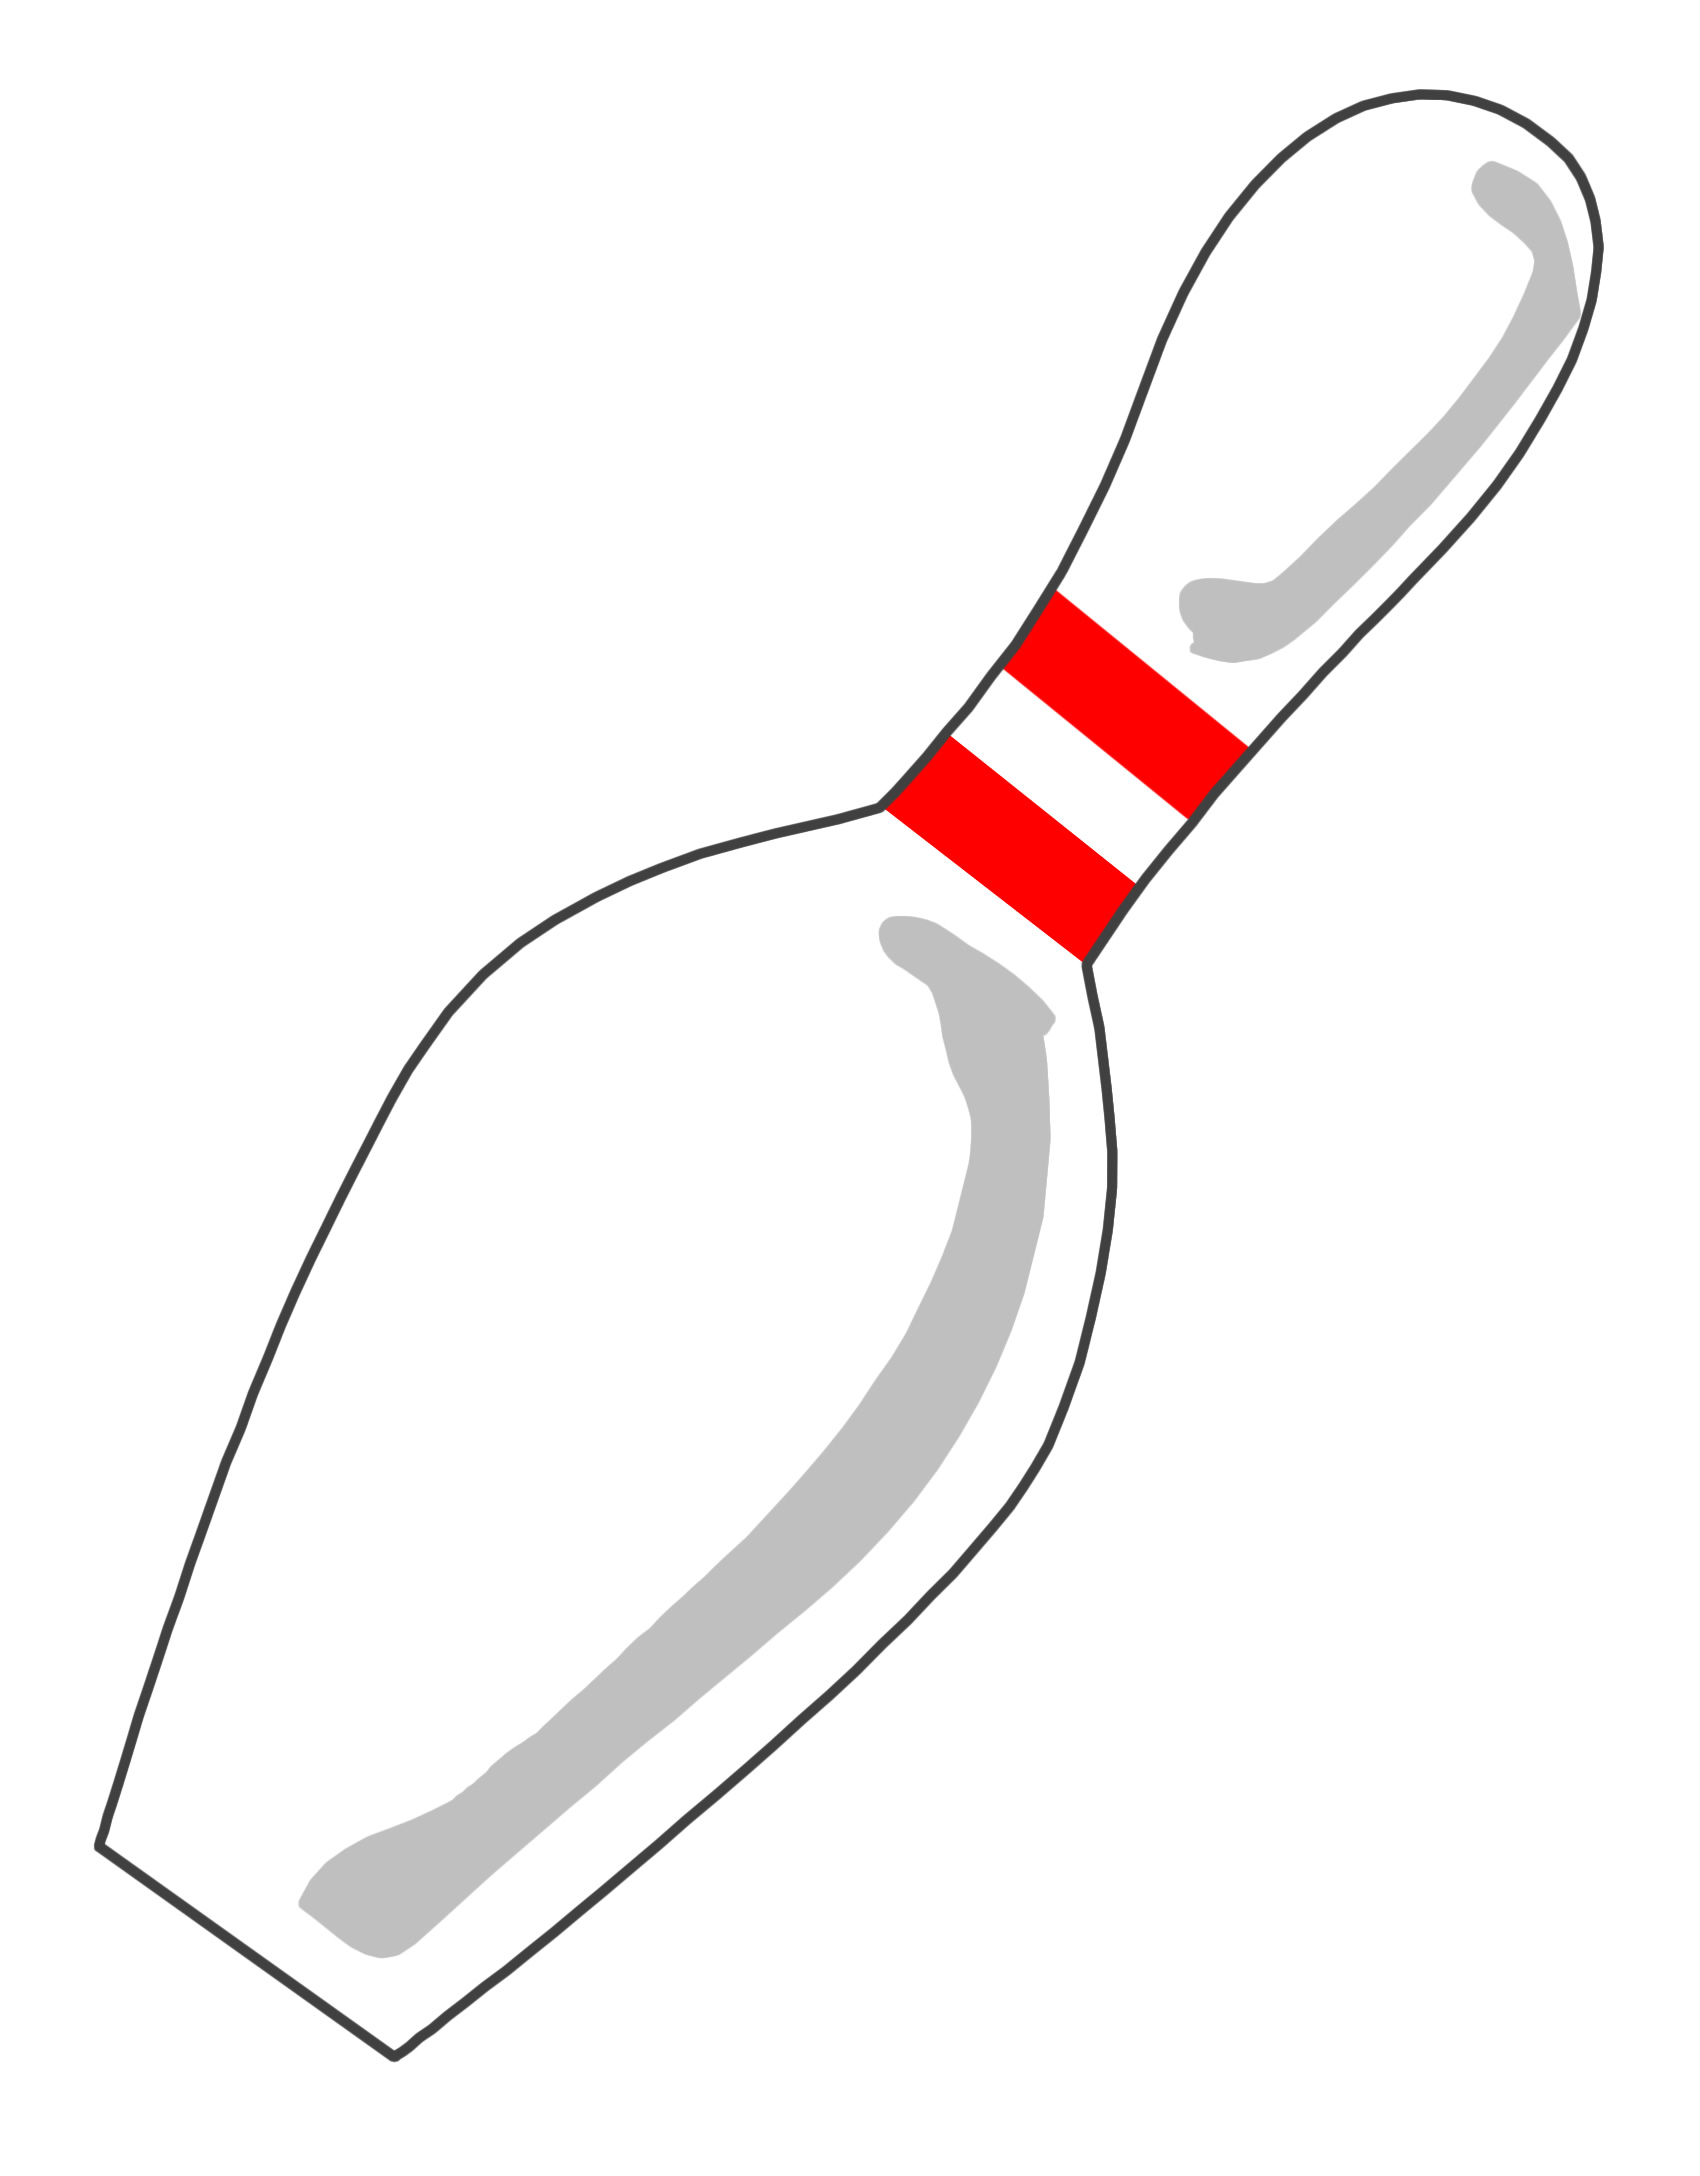 Bowling Pin Outline Cliparts.co